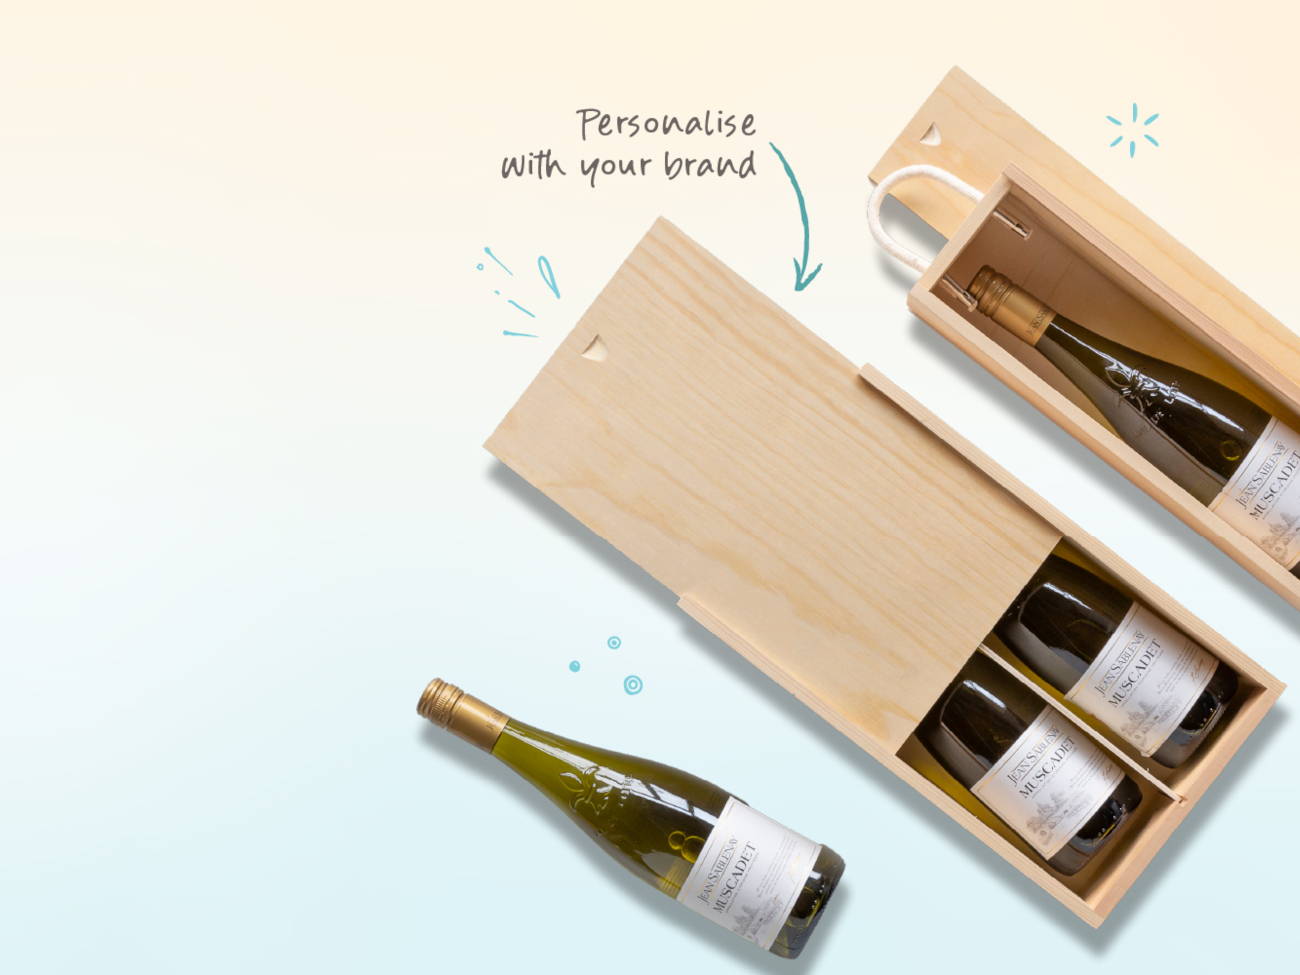 All about wine - some wooden bottle boxes with drinks bottles inside them and the text personalise with your brand